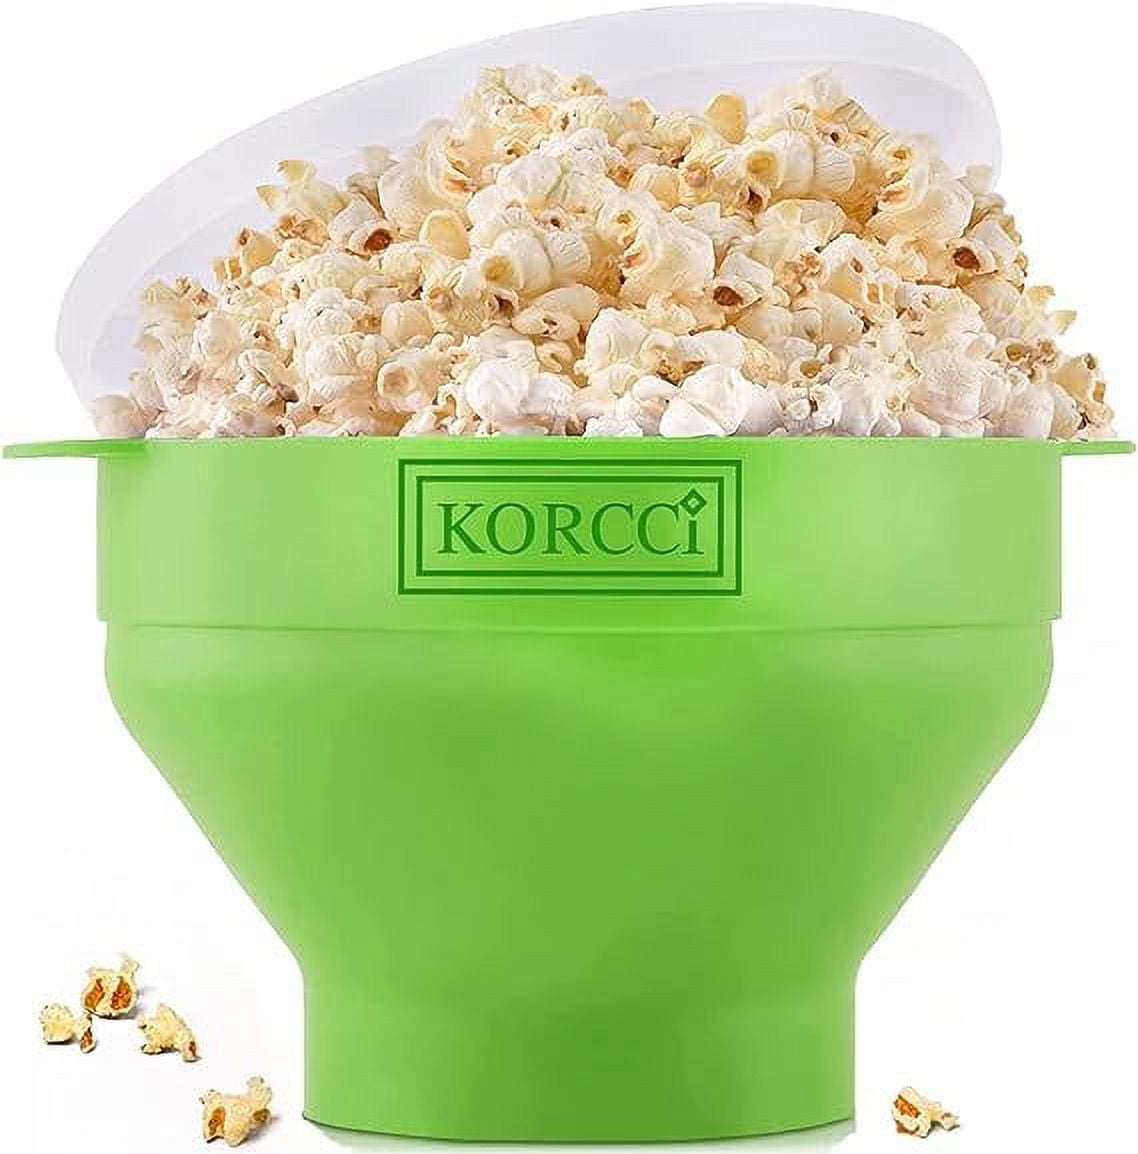 W&P Microwave Silicone Popper Maker | Black | Collapsible Bowl w/Built in  Measuring, BPA, Eco-Friendly, Waste Free, 9.3 Cups of Popped Popcorn